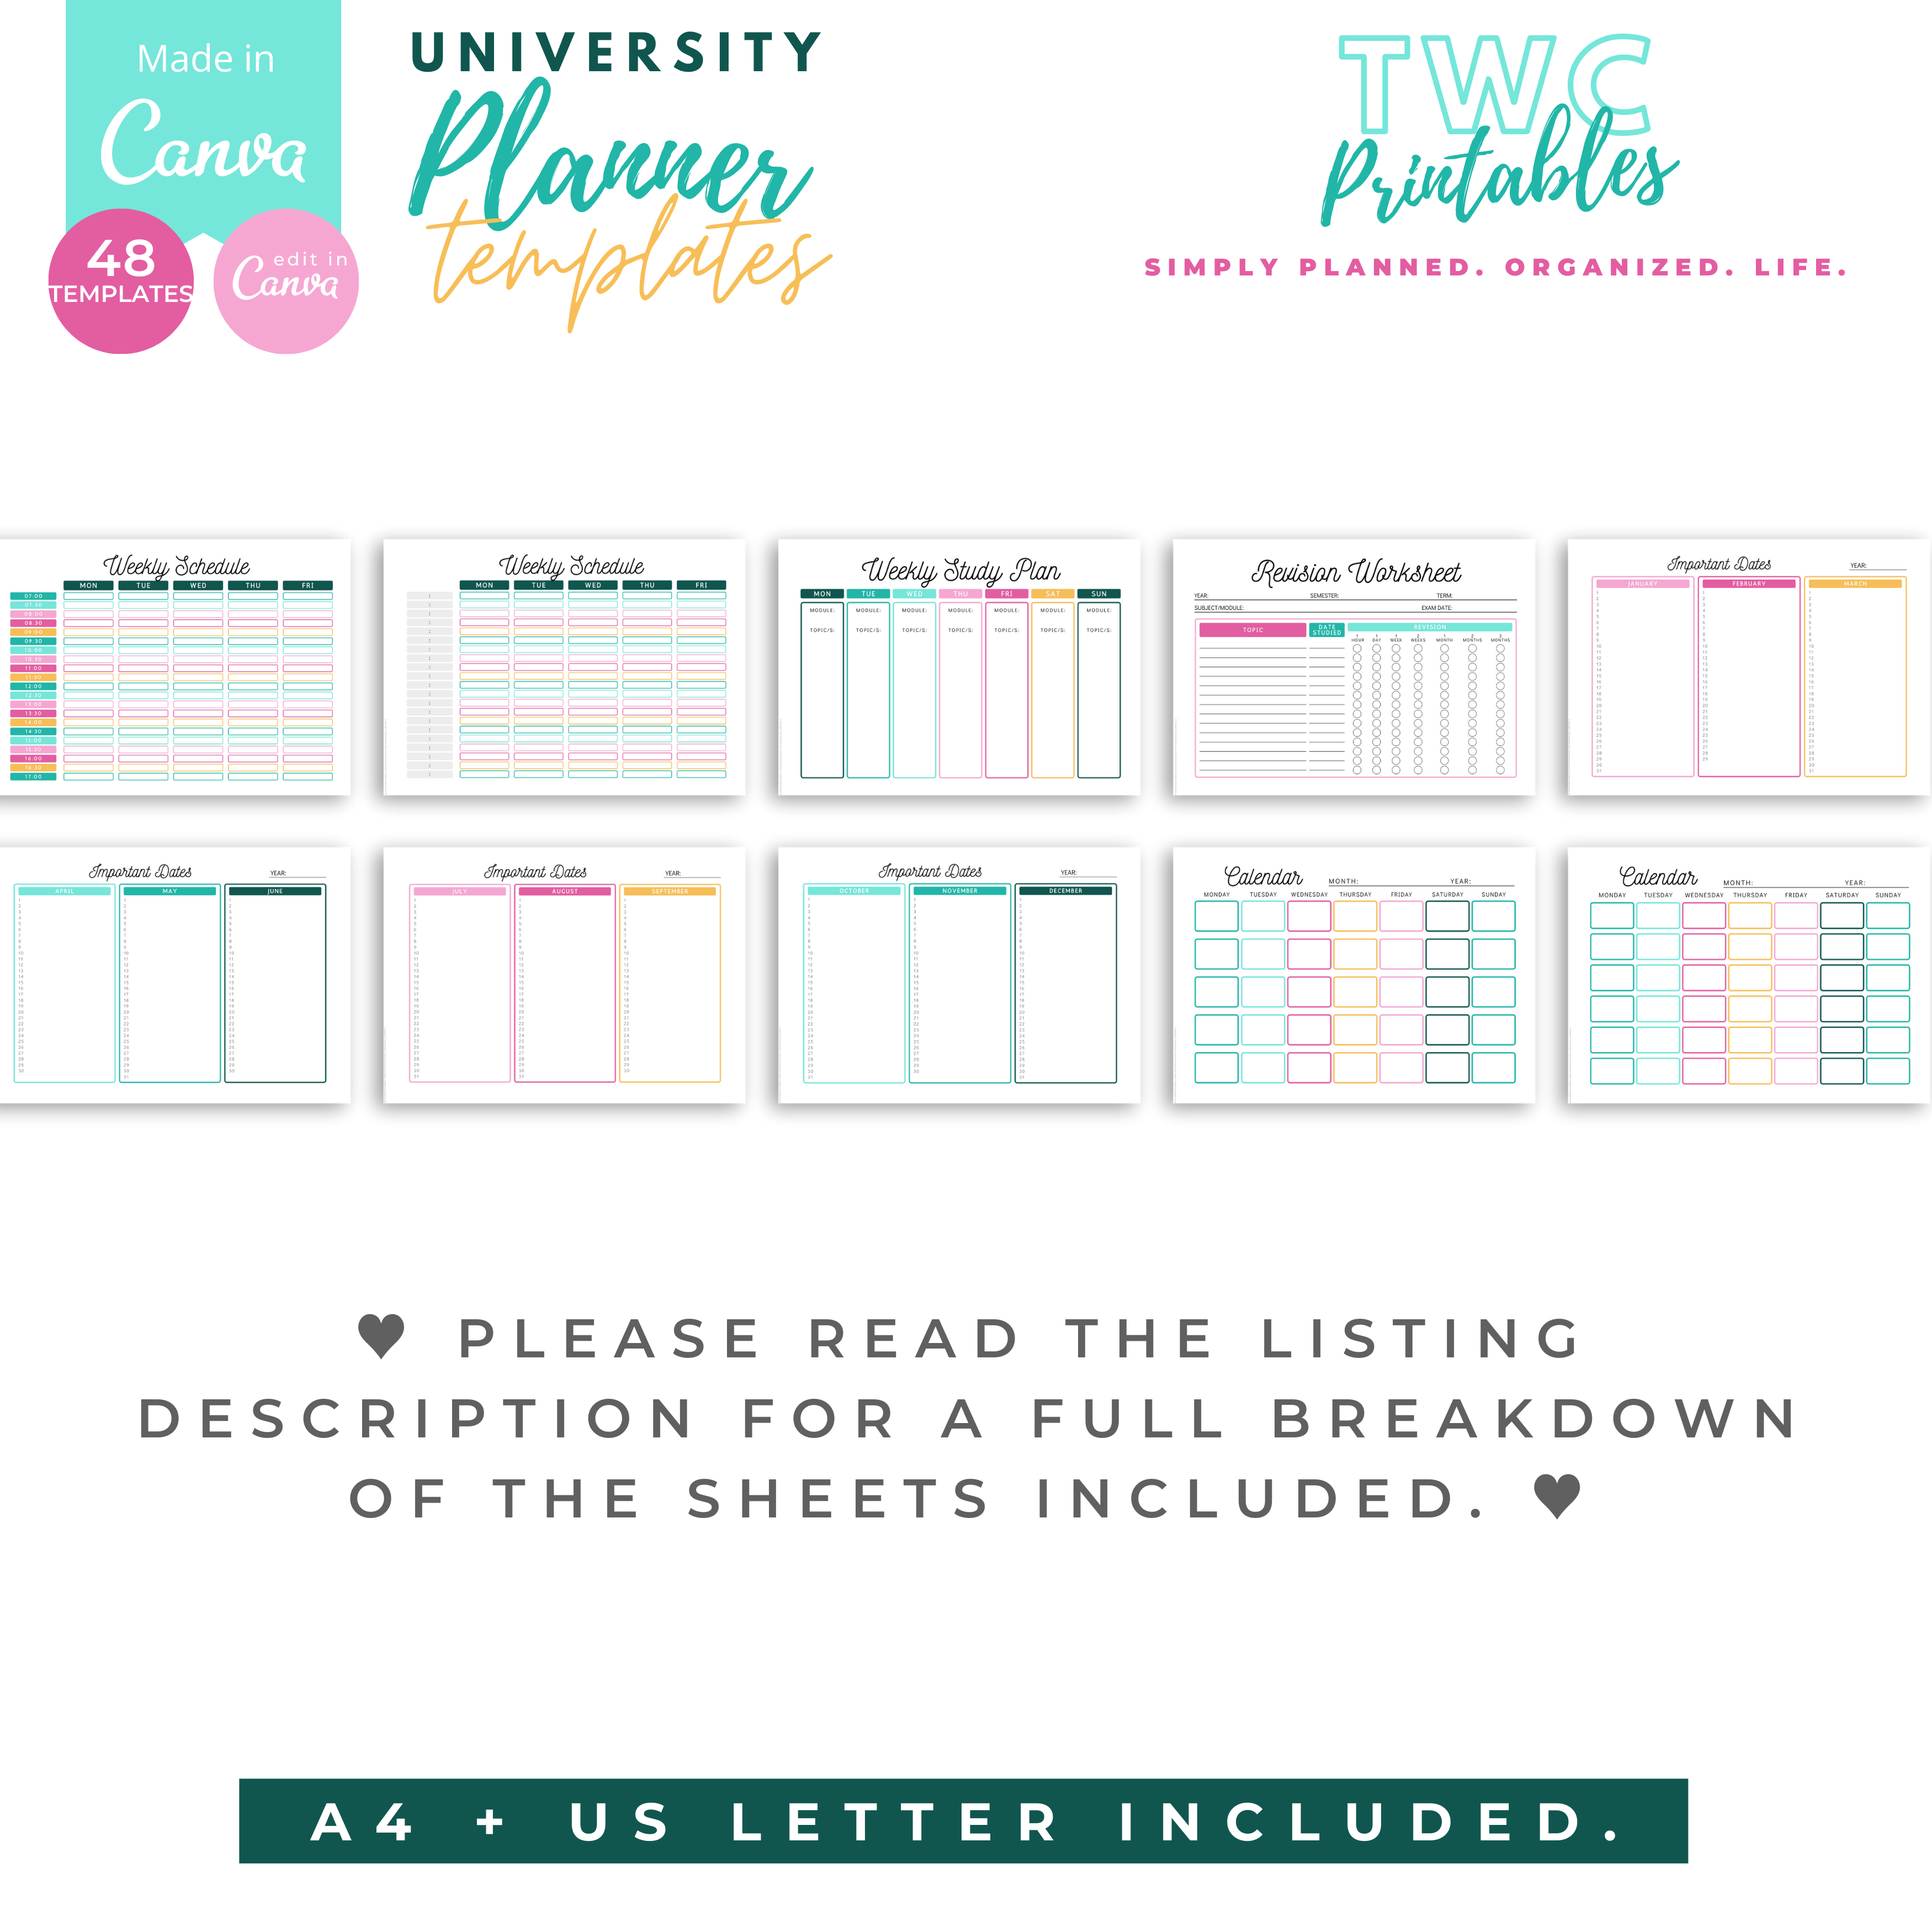 Plan out your student life with these editable university planner templates for Canva! Suitable for high school, college and university, these planner worksheets will help you to prep for exams, manage individual and group assignments, work with schedules, organize your study content and so much more! You can change everything from colors to fonts, text, elements, etc. all you need is a free Canva account.